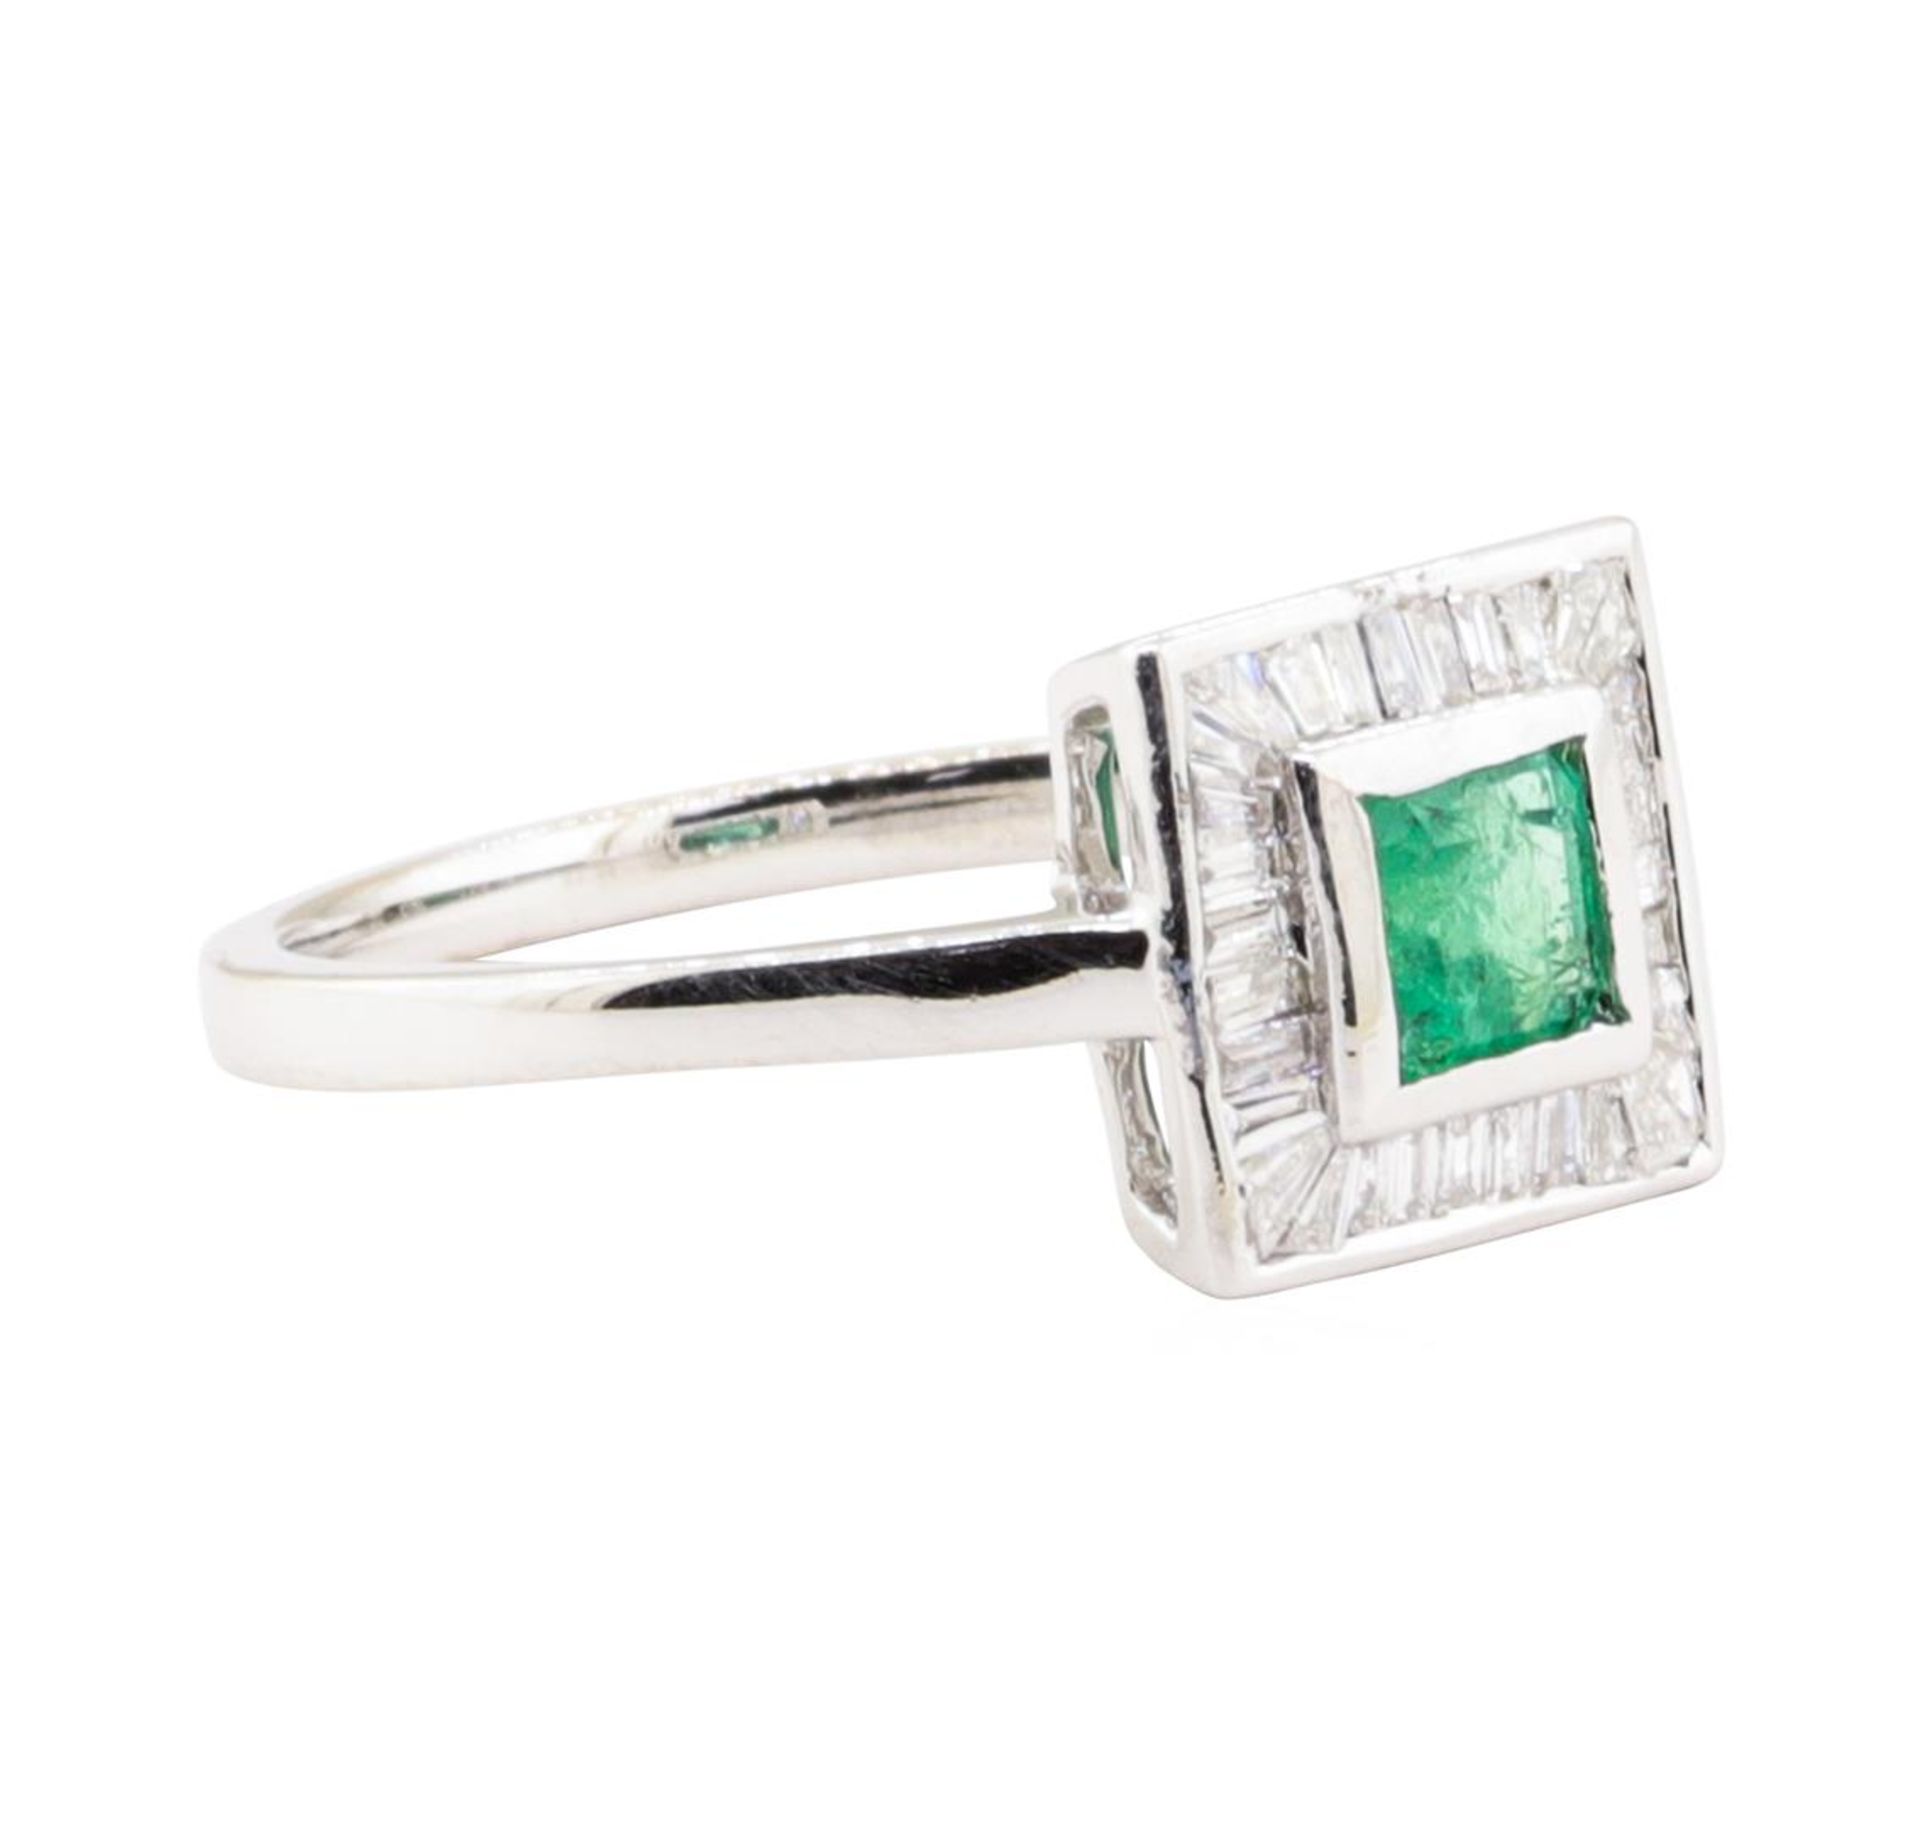 0.41ct Emerald and Diamond Ring - 18KT White Gold - Image 2 of 5